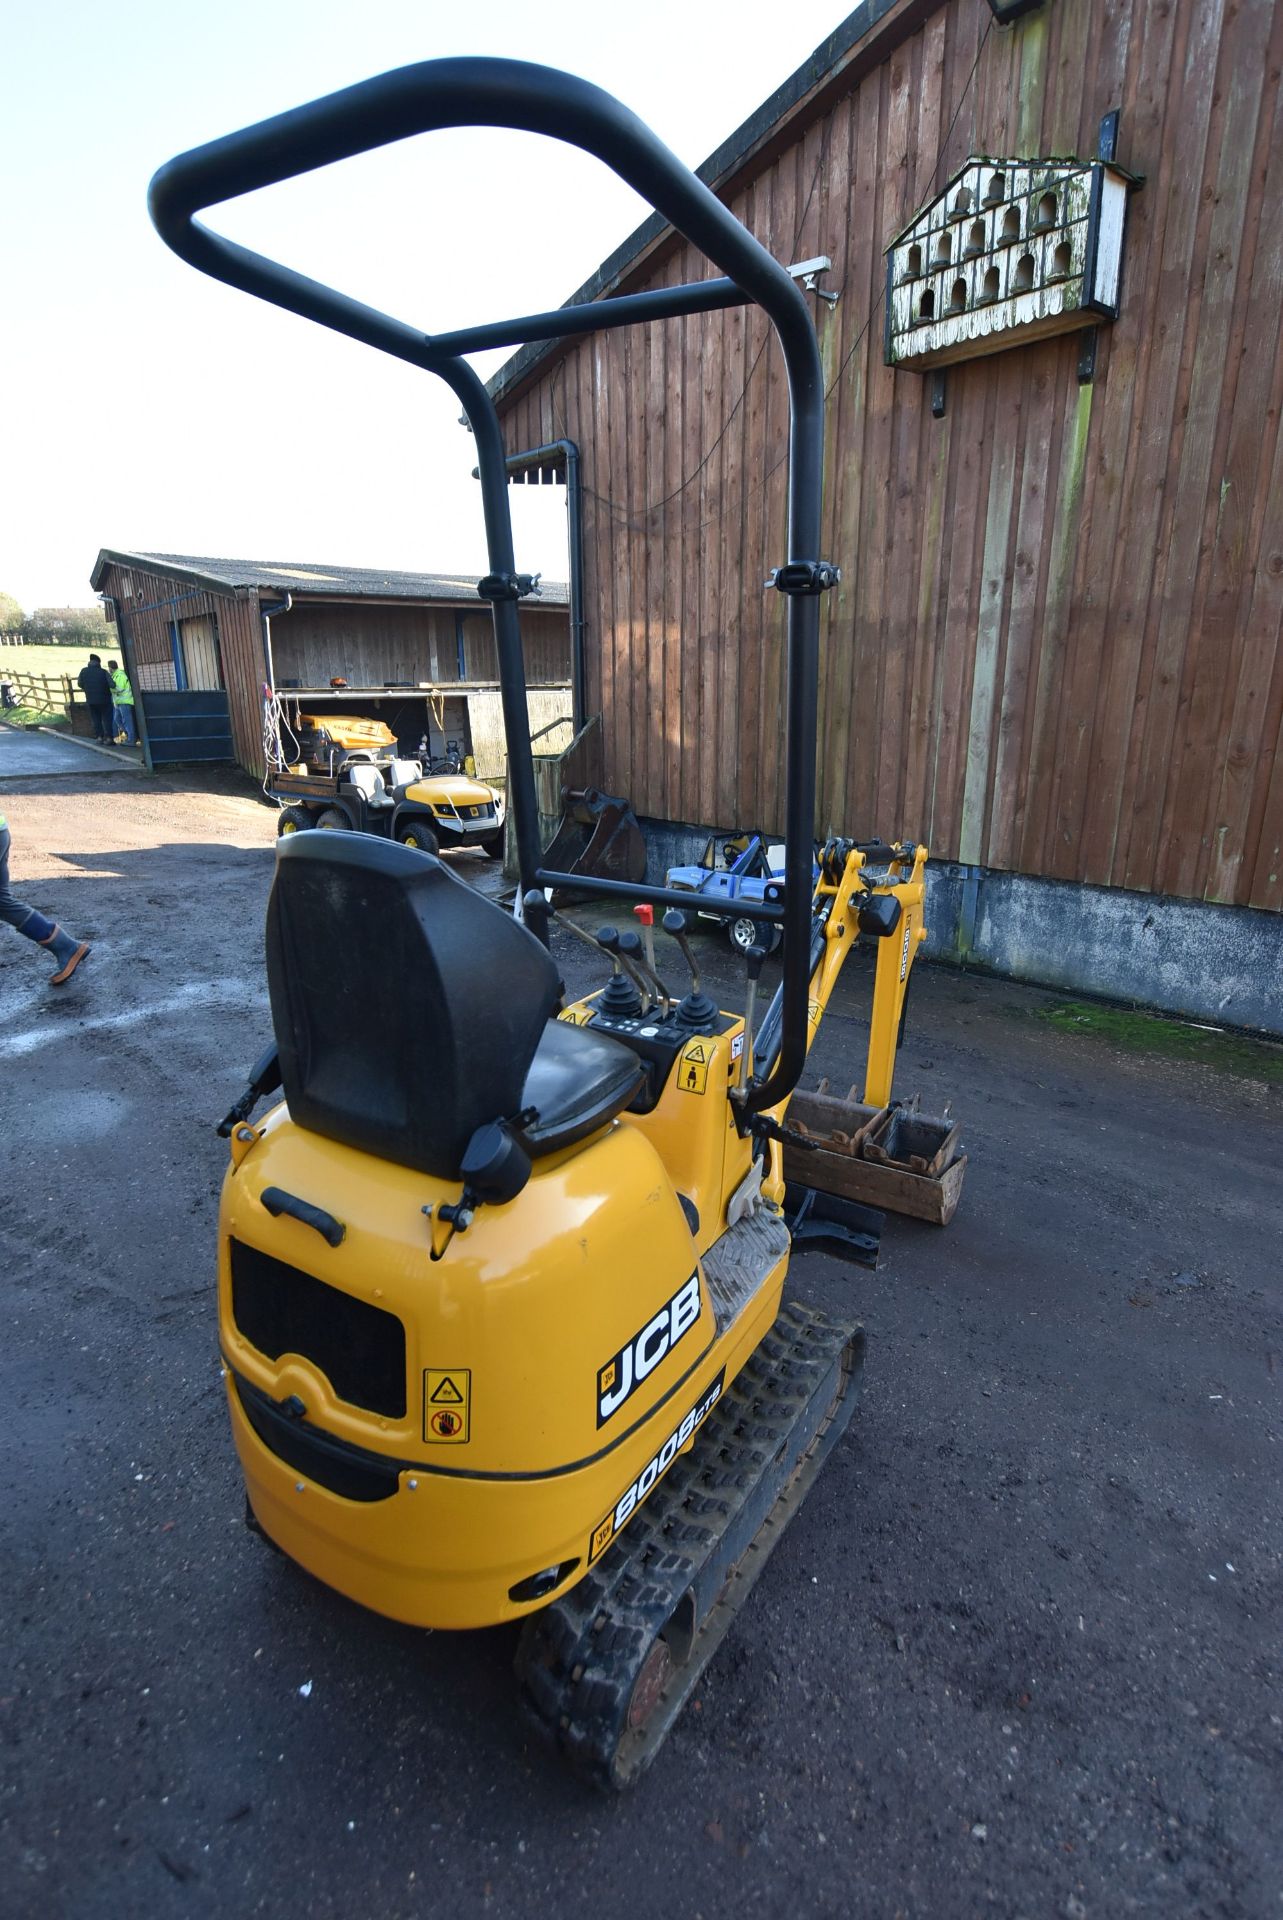 JCB 8008 CTS 950kg TRACKED COMPACT EXCAVATOR, serial no. 02410665, year of manufacture 2014, - Image 3 of 9